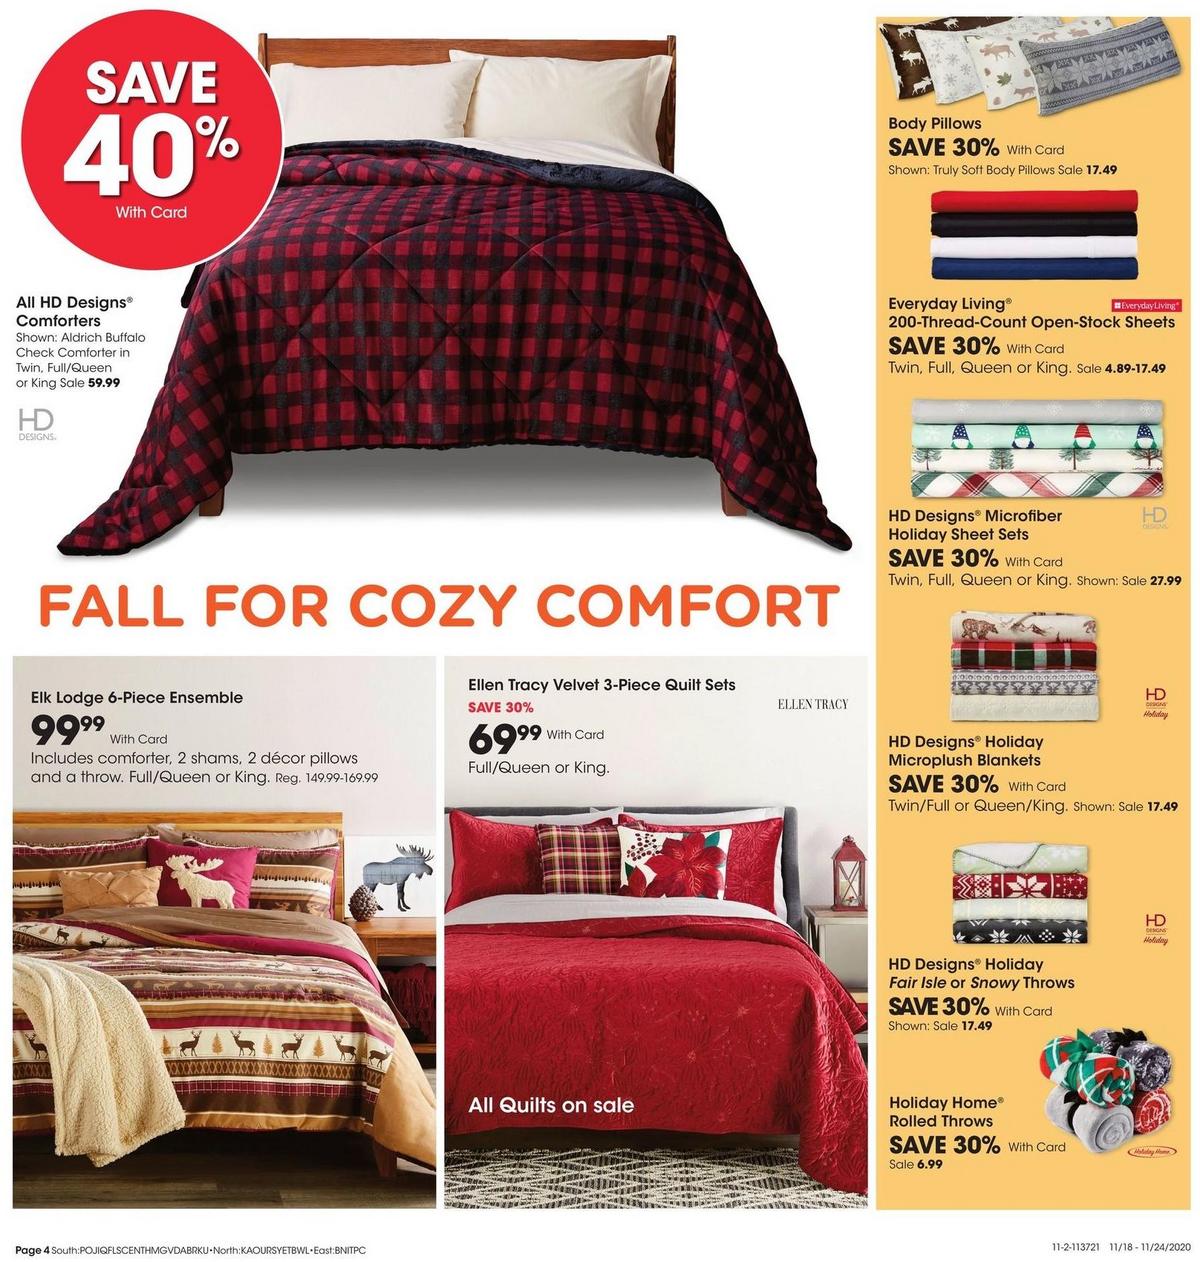 Fred Meyer General Merchandise Weekly Ad from November 18